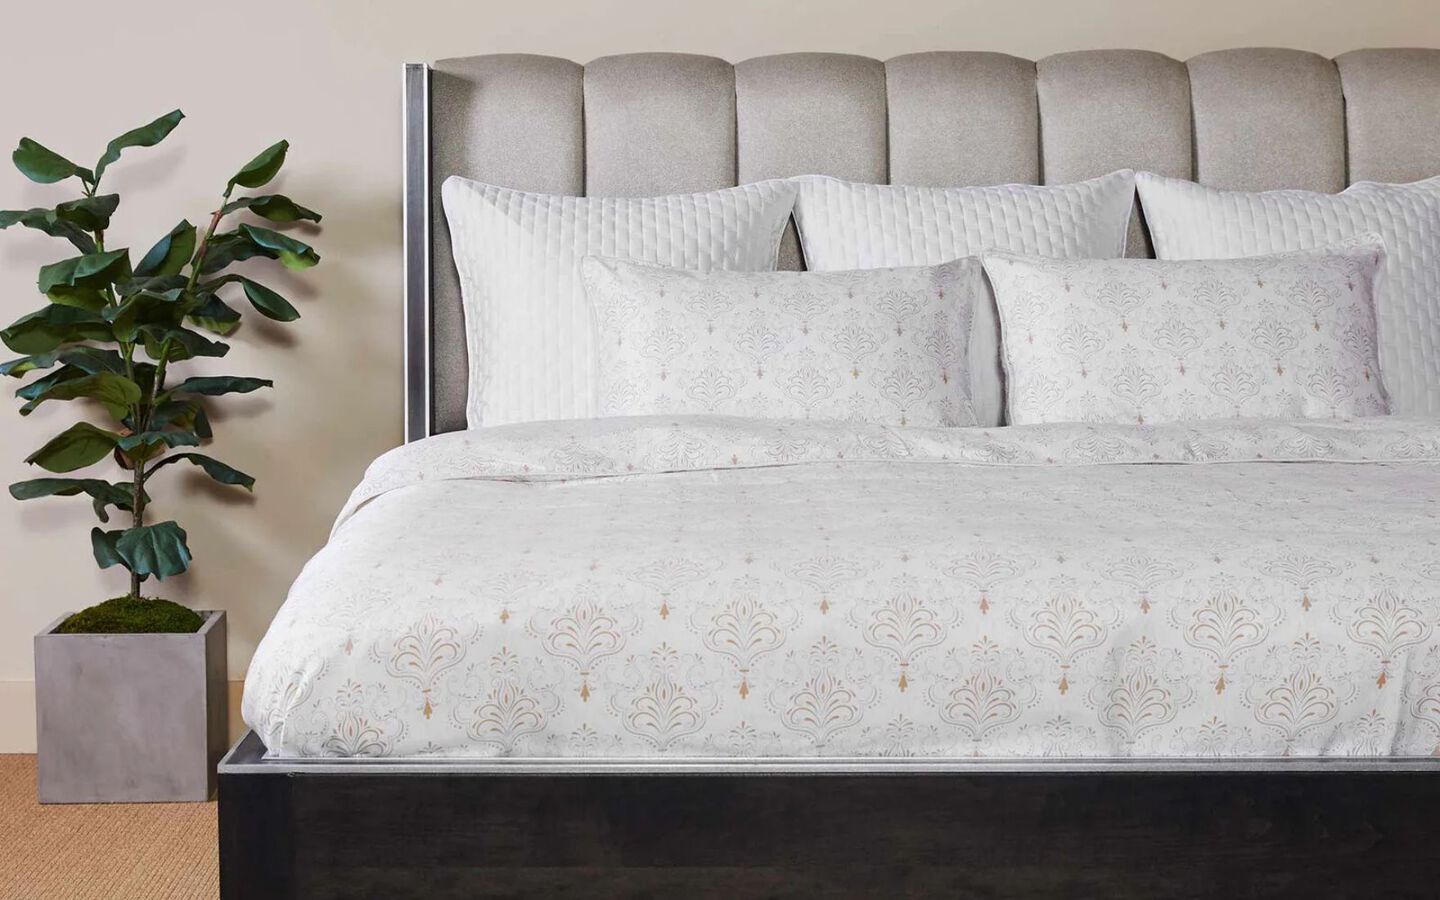 Bed with upholstered bedframe and white patterned comforter and pillows